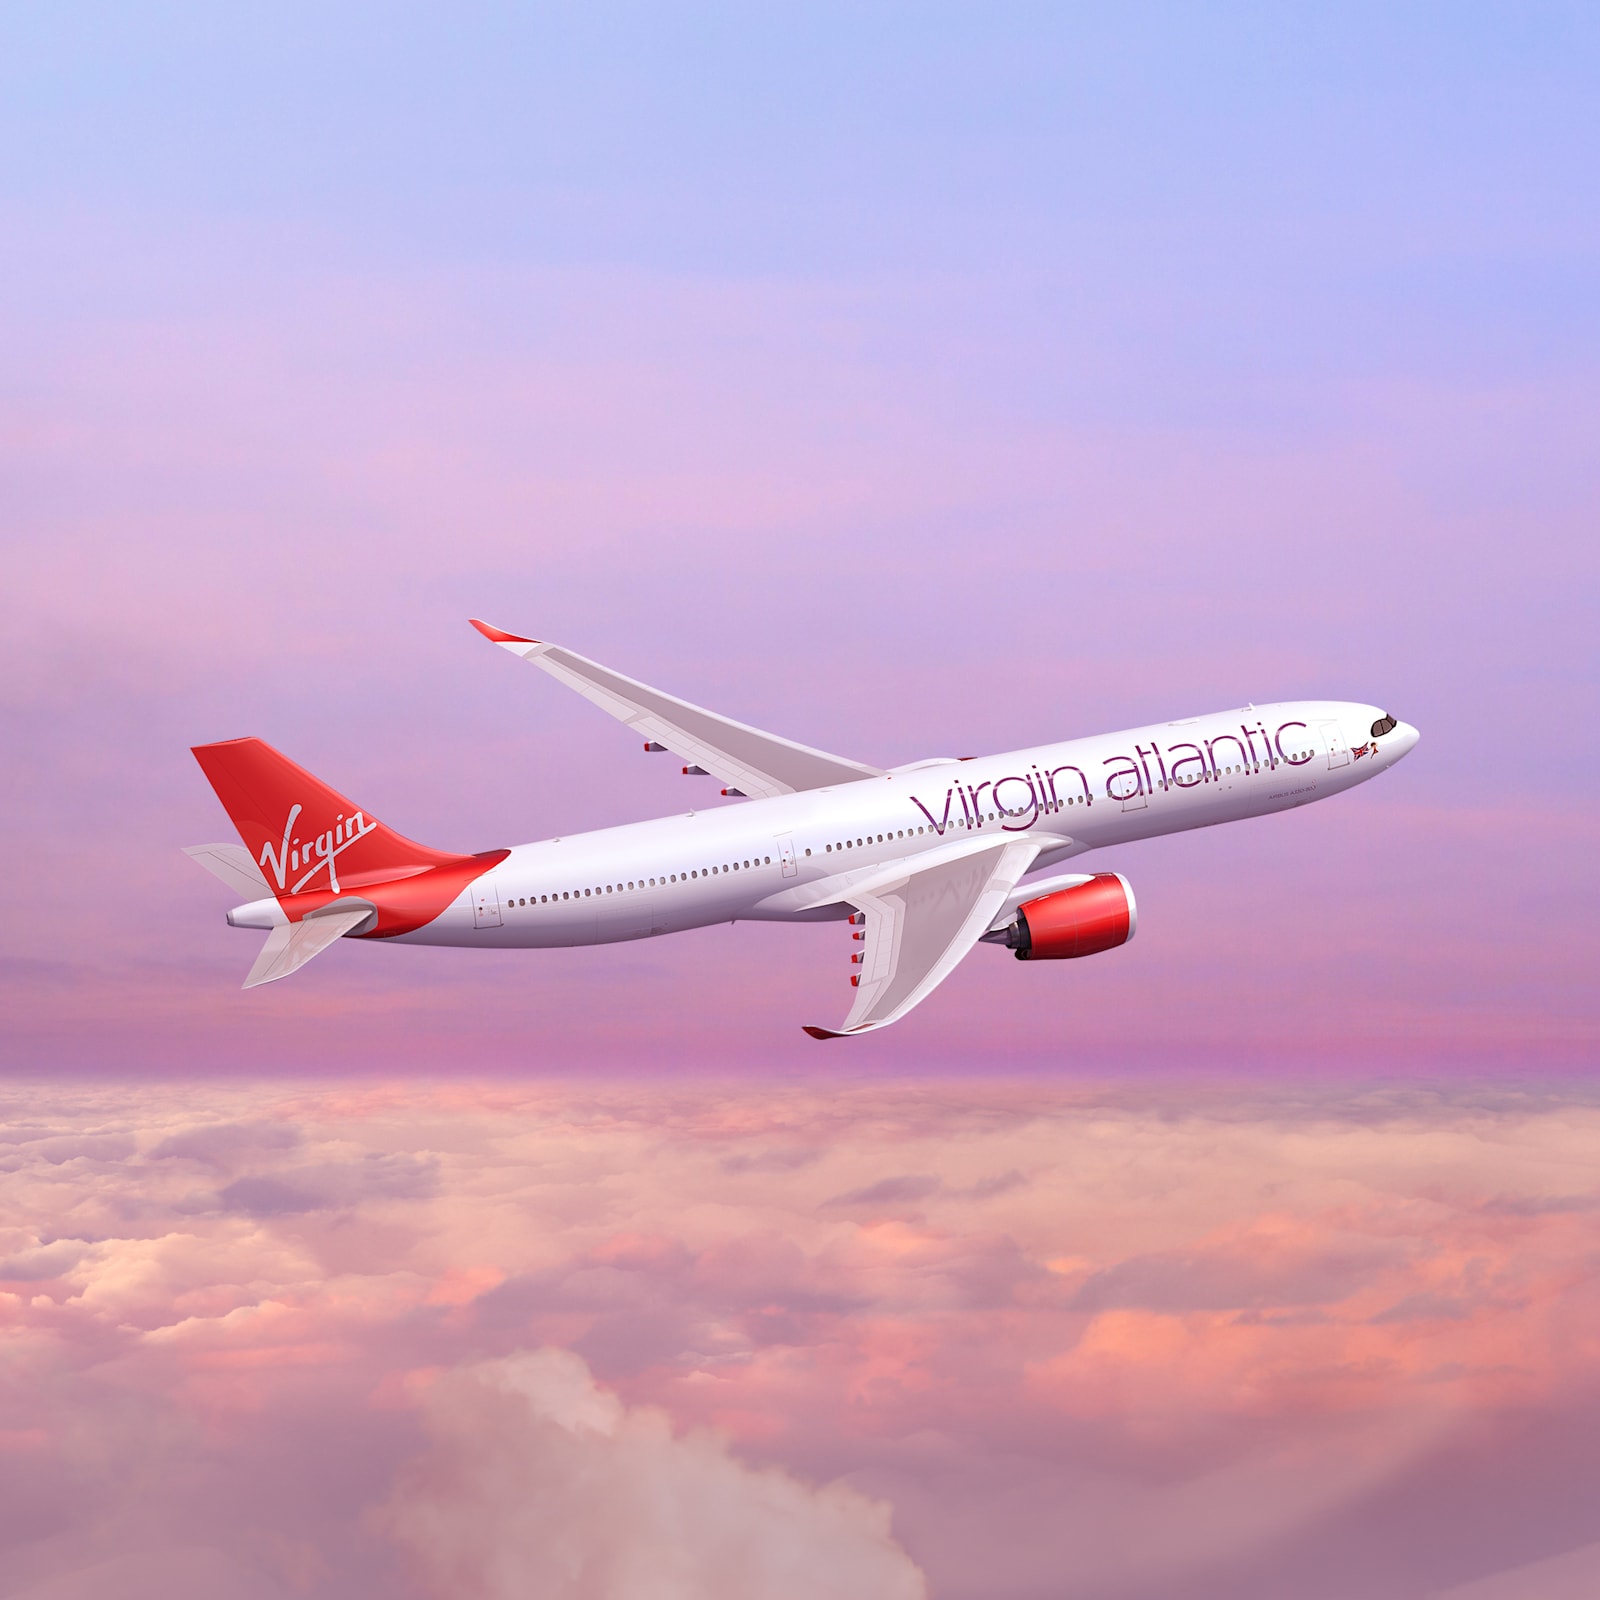 Virgin Atlantic set to phase out remainder of A340s by end of 2019